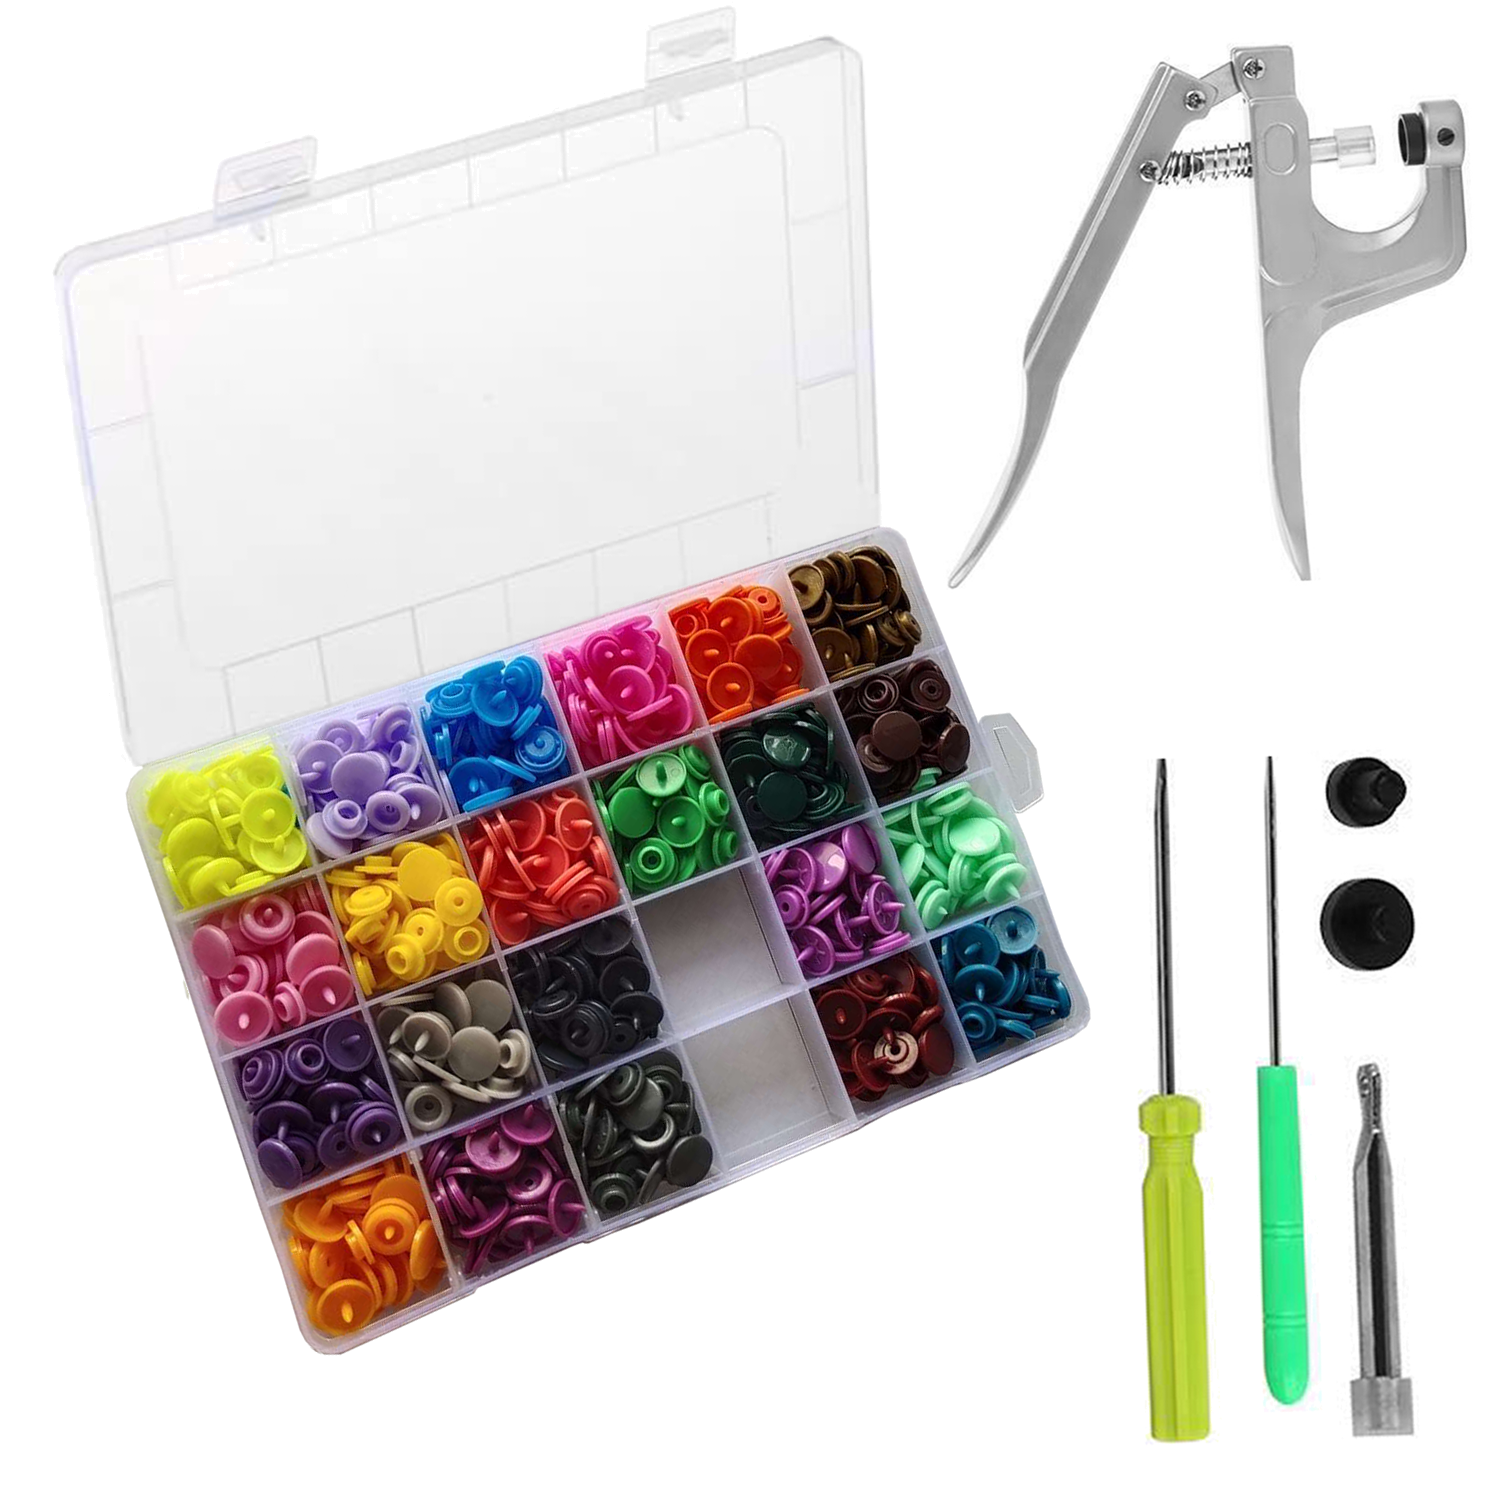 Shop for and Buy Plastic Snap Clips - Bulk Assorted Colors at .  Large selection and bulk discounts available.